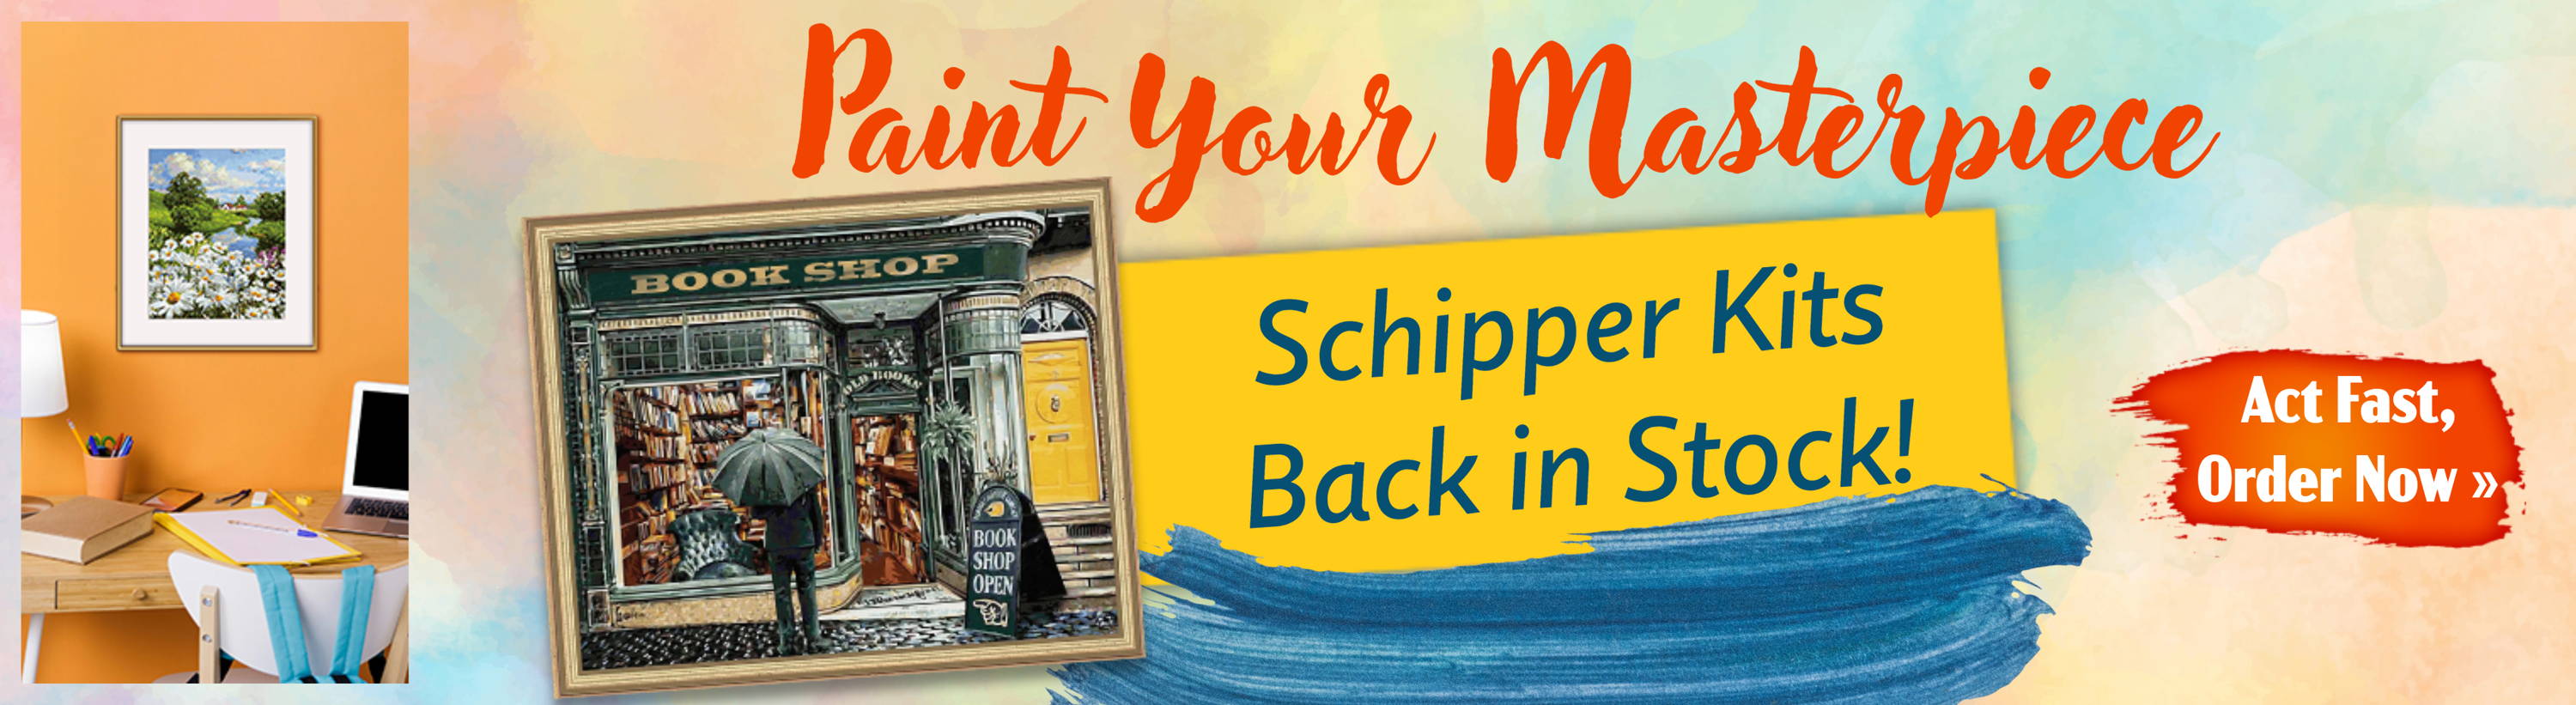 Paint your Masterpiece! Schipper Paint by Number Kits are Back in Stock! Image: Schipper Paint by Number Kits.